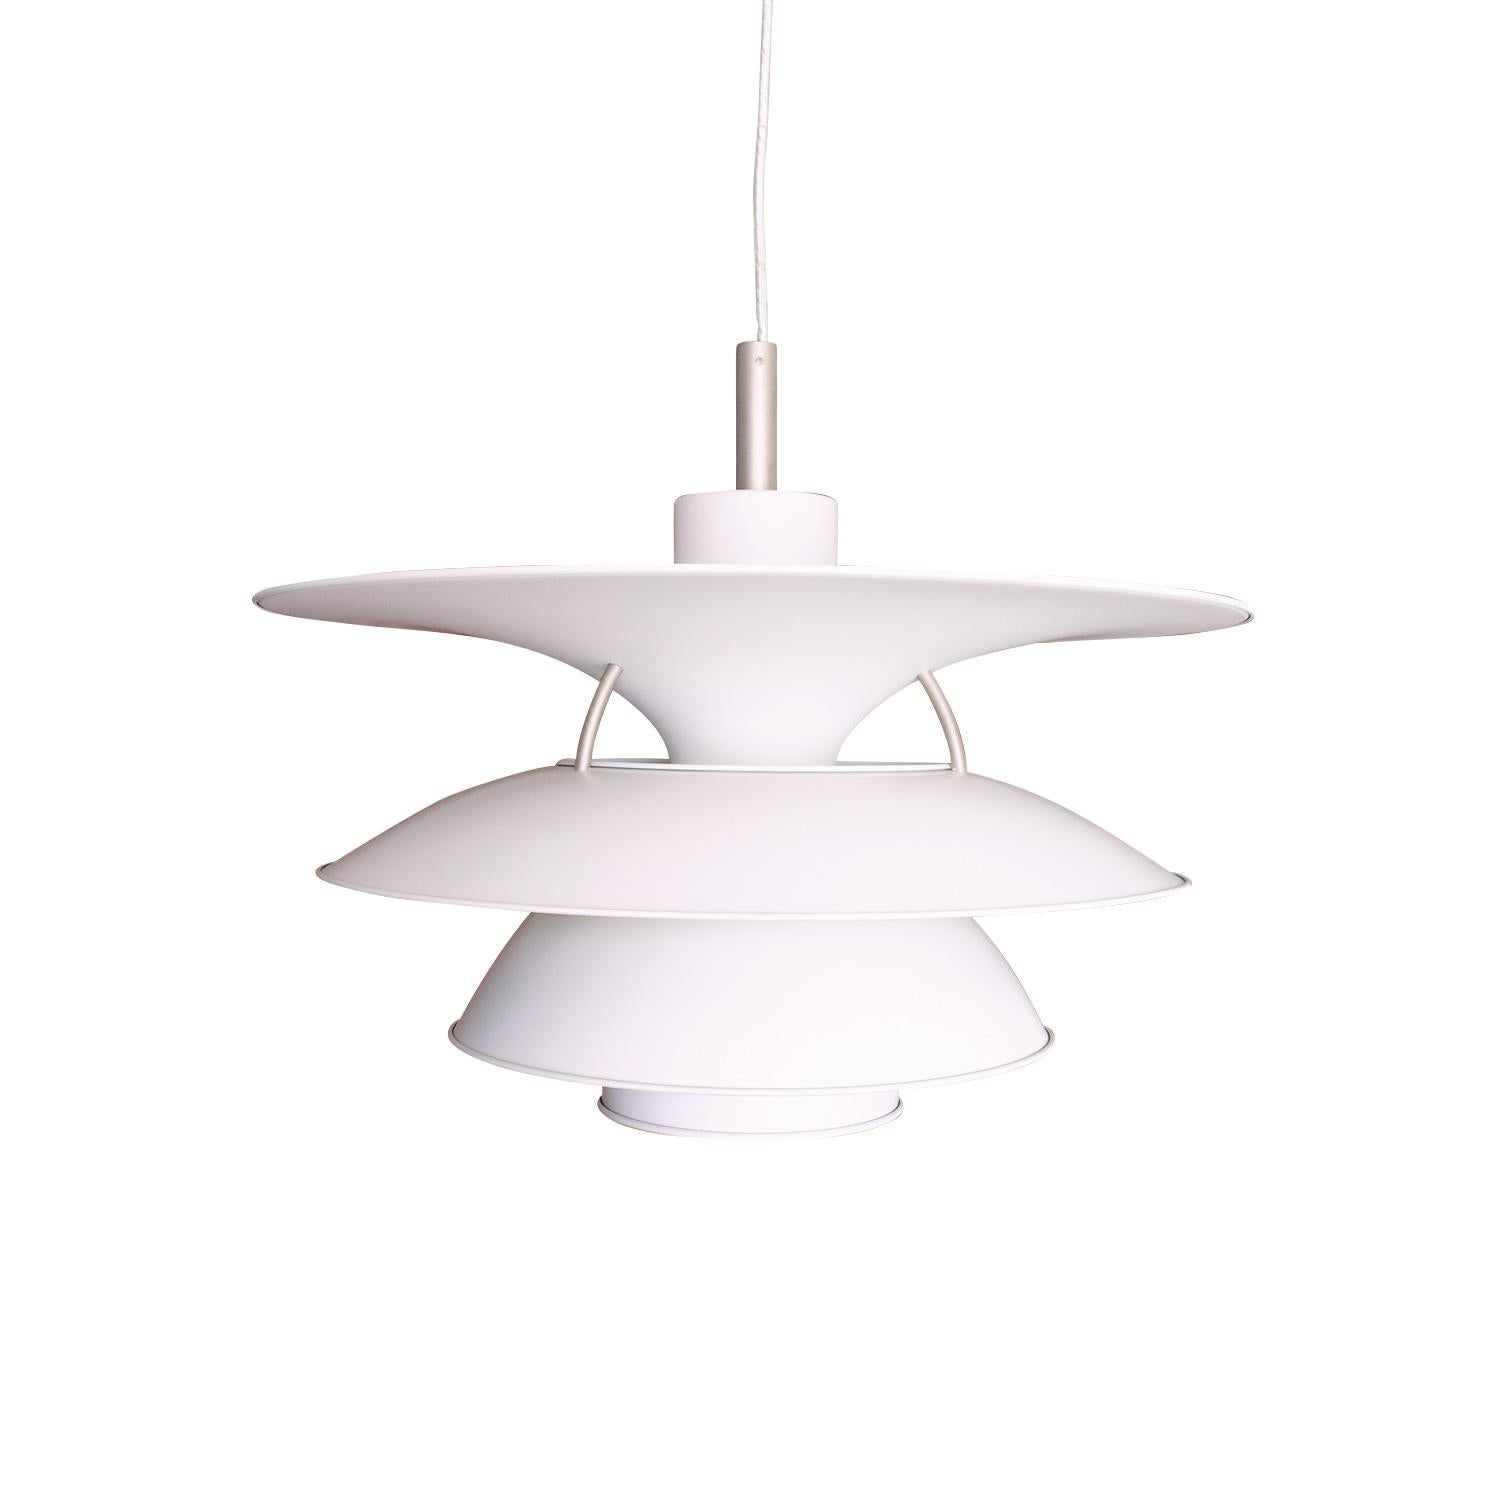 Poul Henningsen’s PH 6½-6 Charlottenburg ceiling lamp produced by Louis Poulsen, Denmark, the largest available size in this series. These lamps have a massive visual impact, and would fit well in a large volume space.

Labelled by Louis Poulsen,